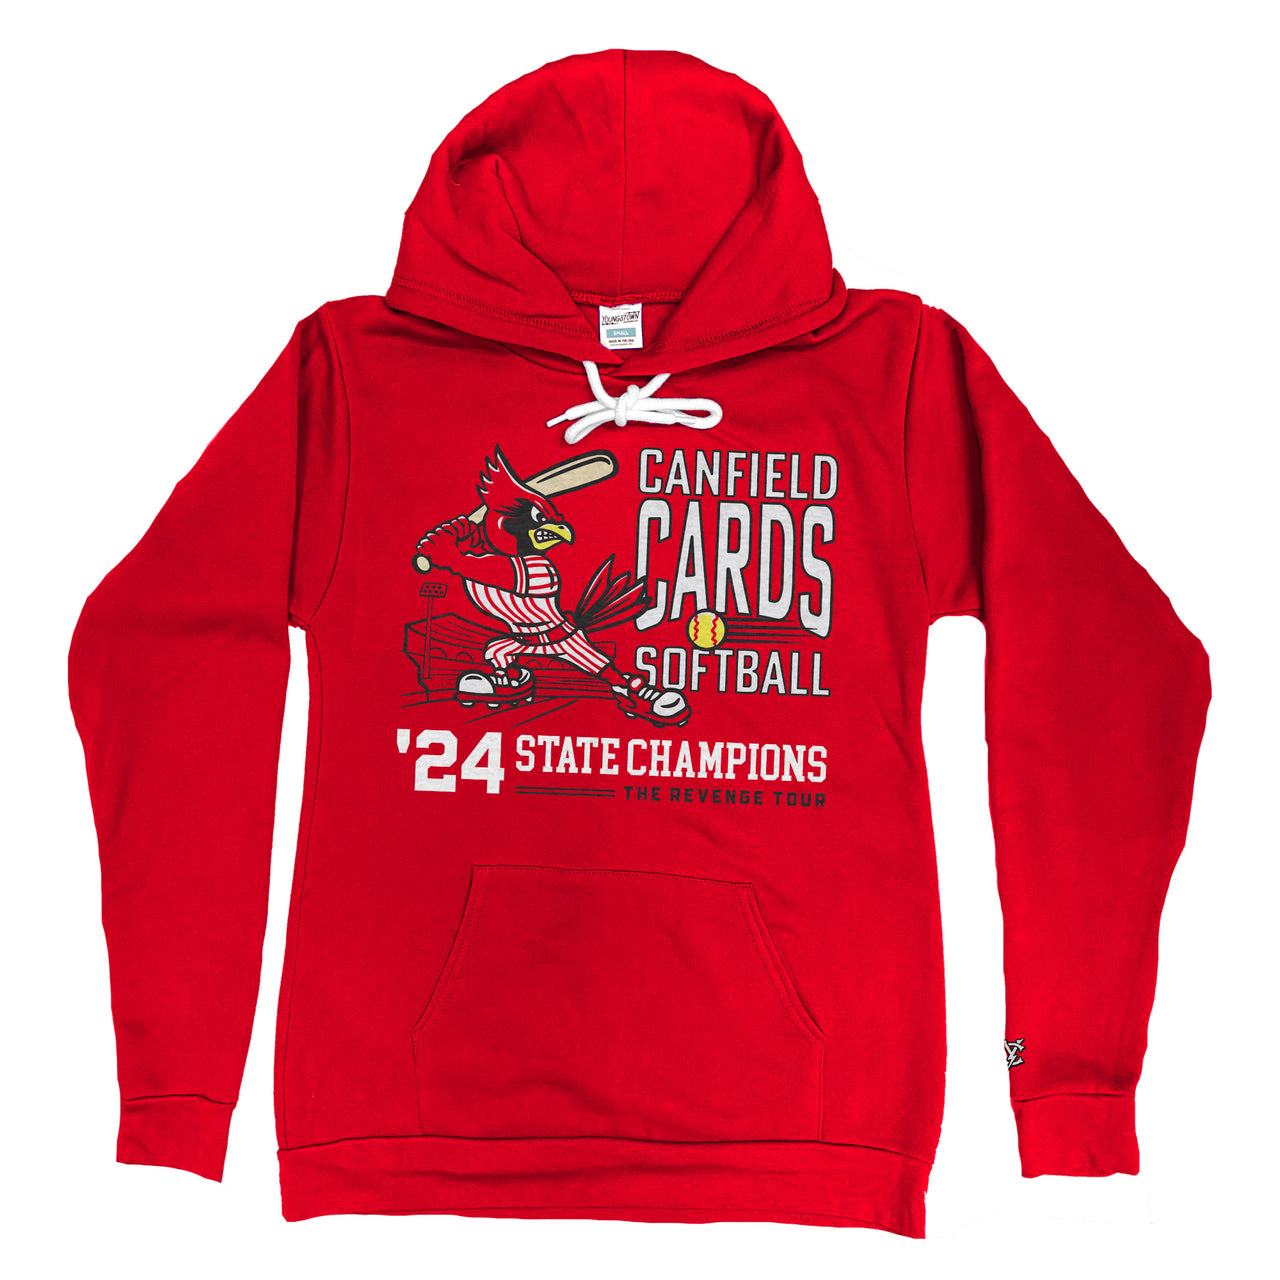 Canfield Cardinals Softball State Champs Hoodie